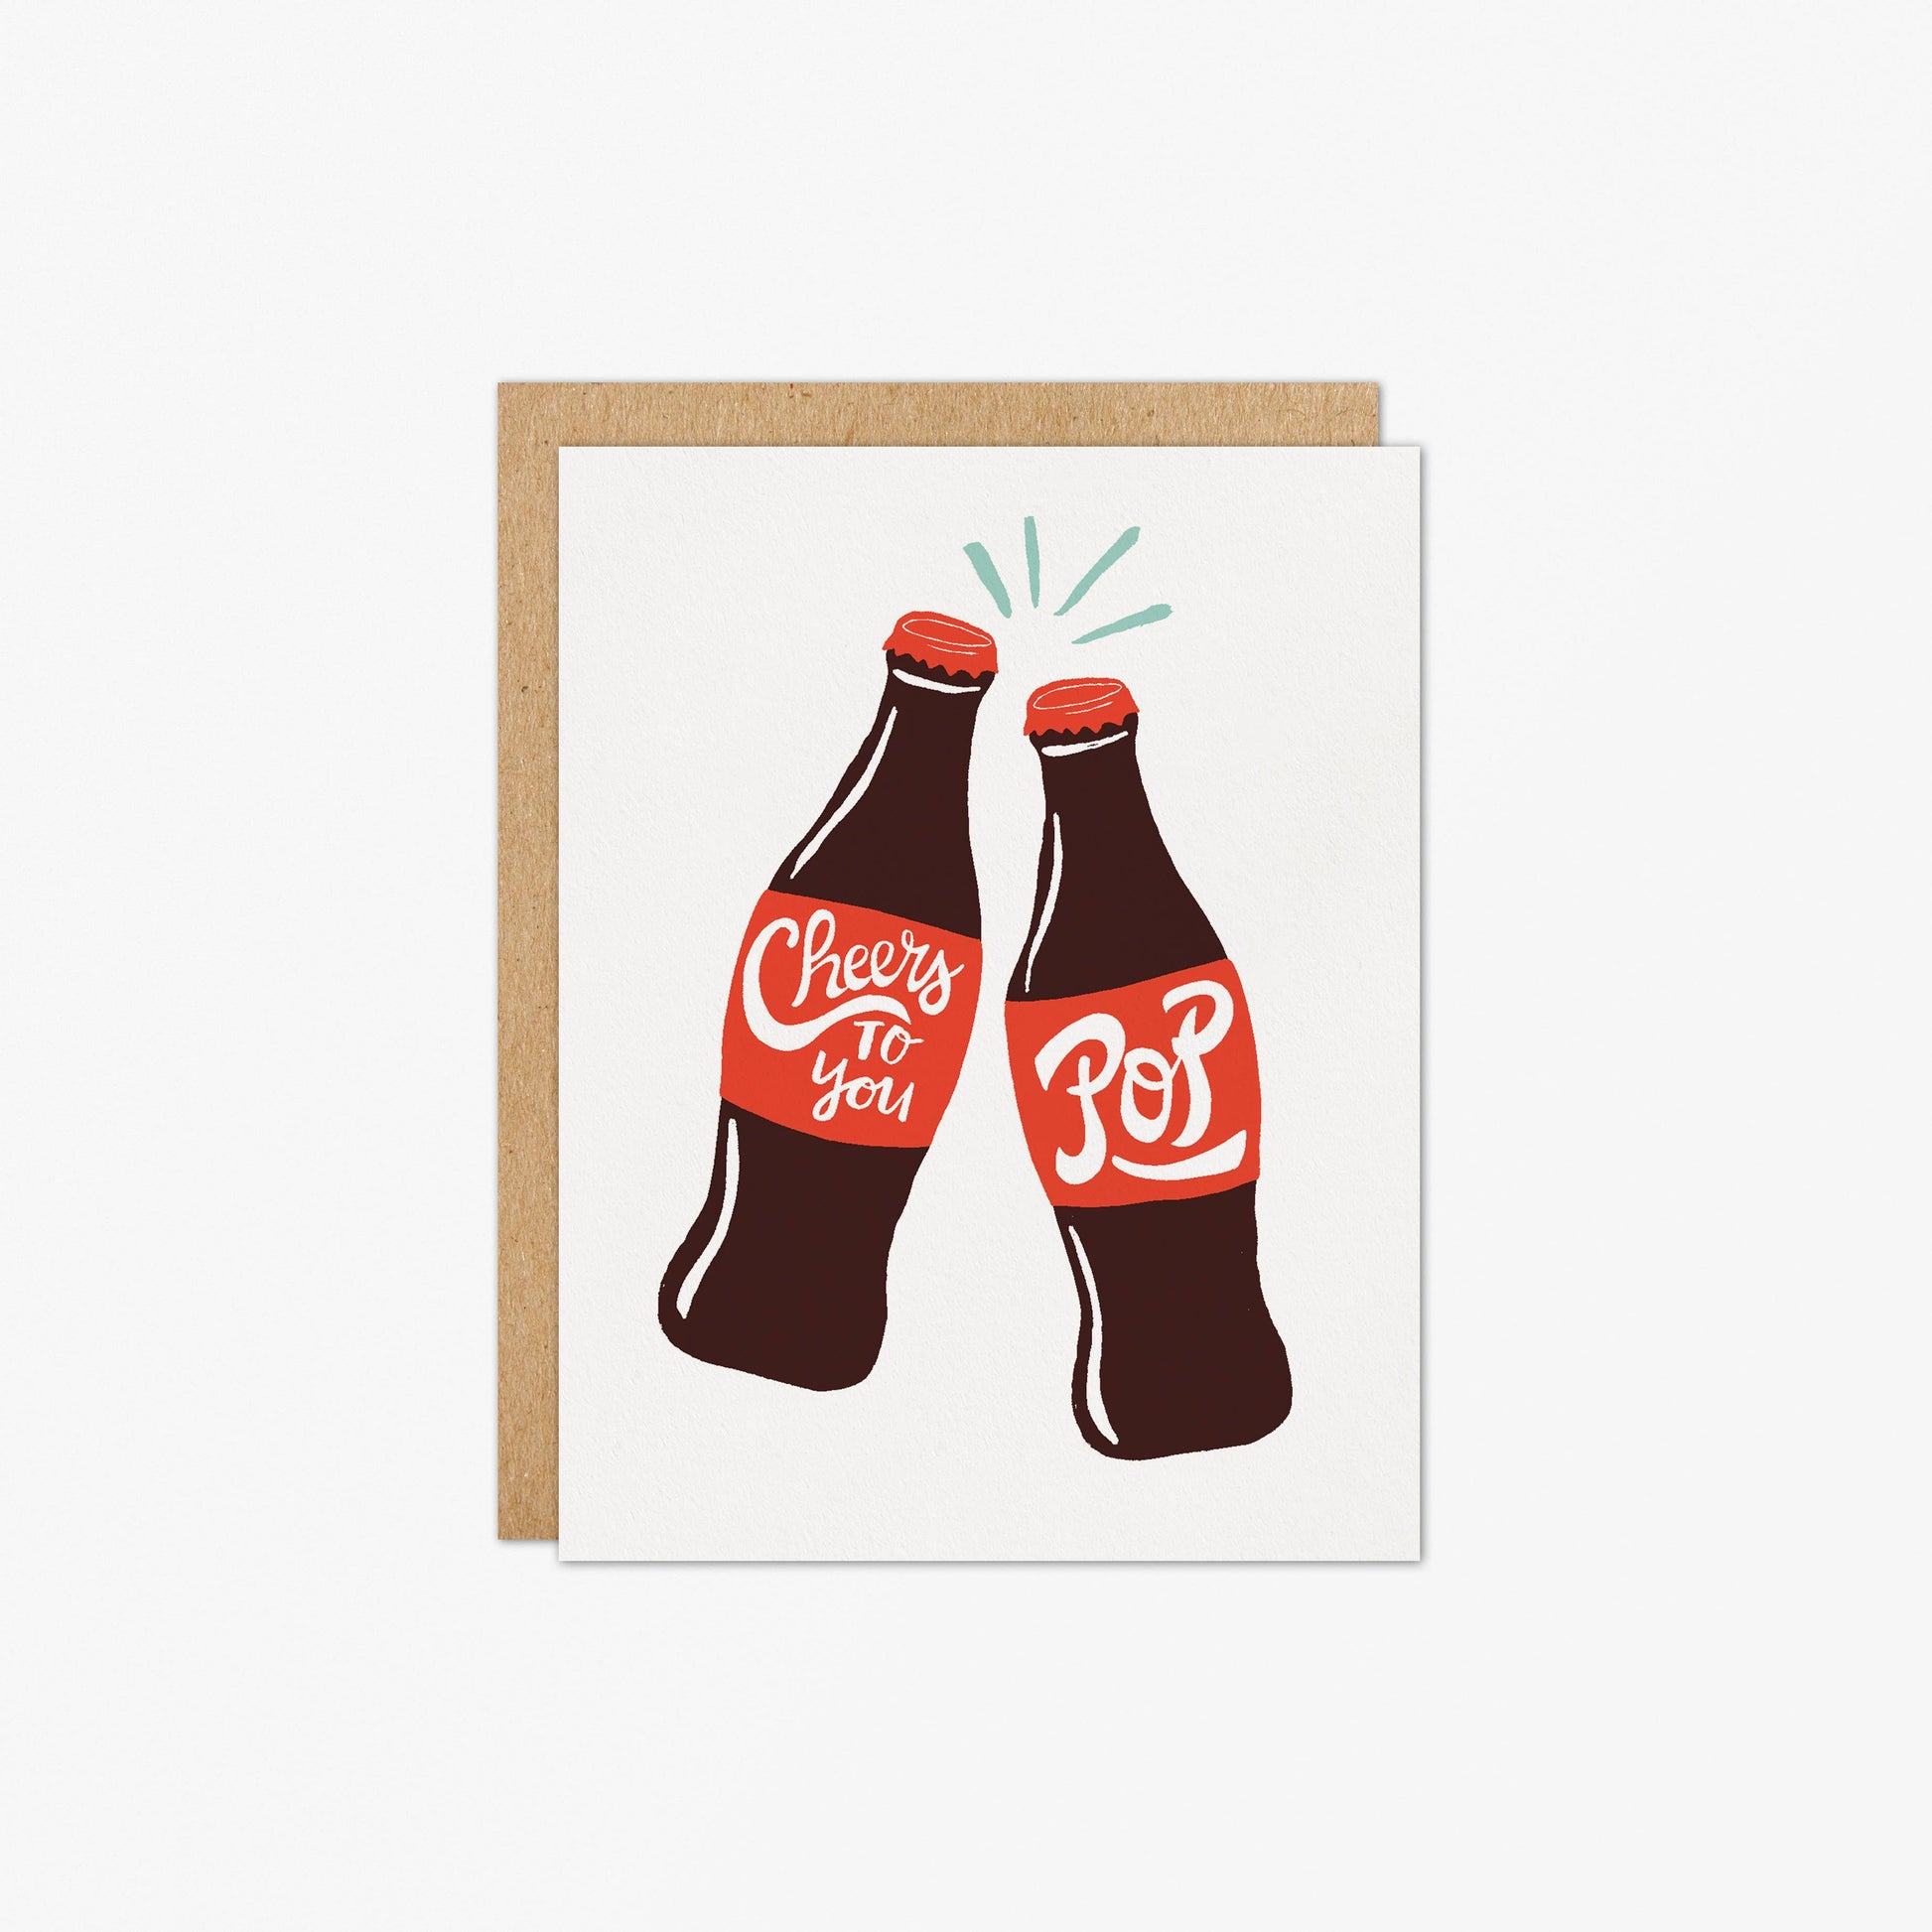 Soda pop greeting card -- has two soda glass bottles on it and reads "Cheers to you Pop" on it 